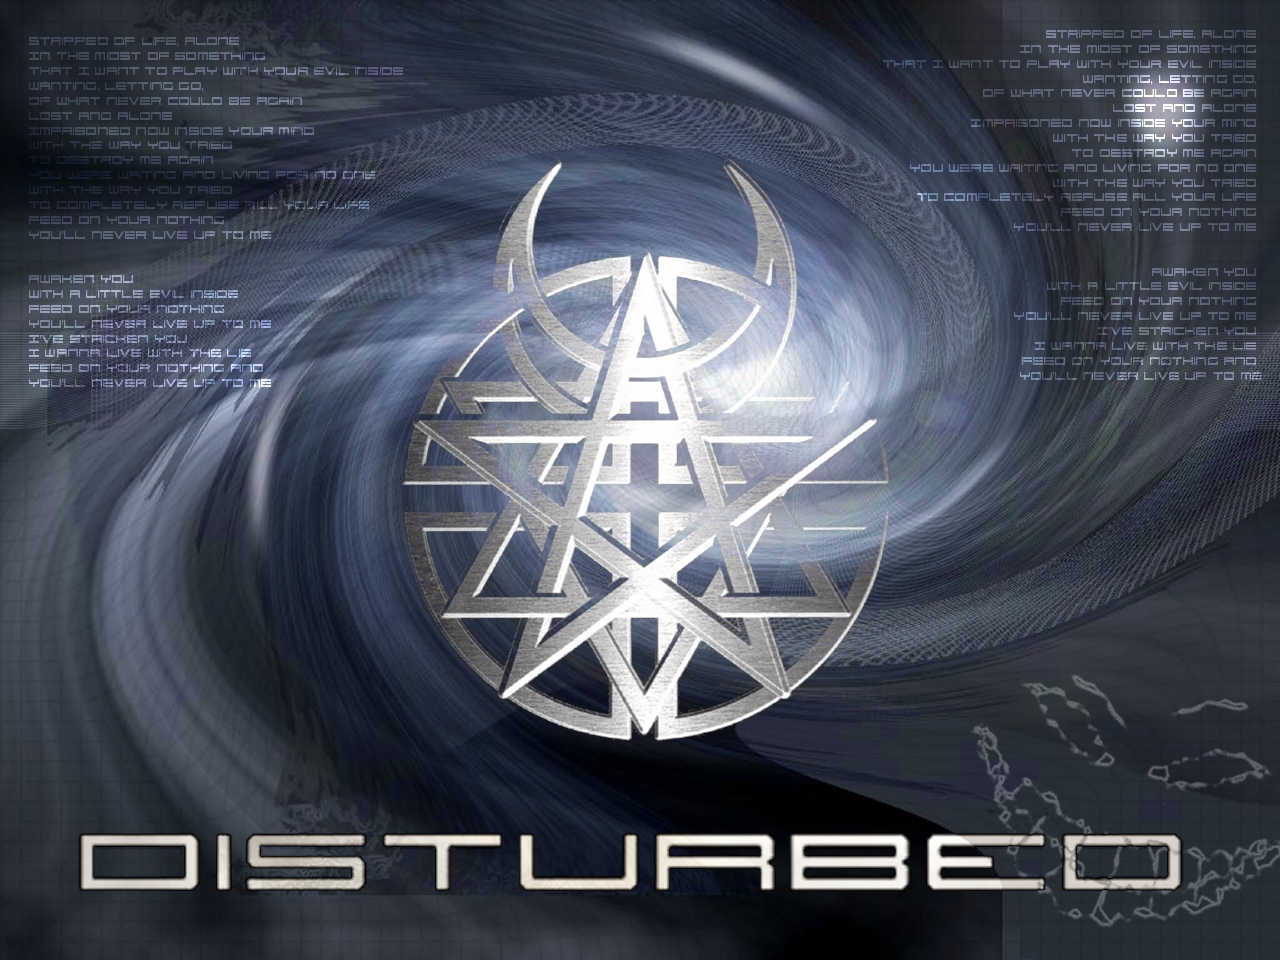 Best Disturbed (Band) phone Wallpapers